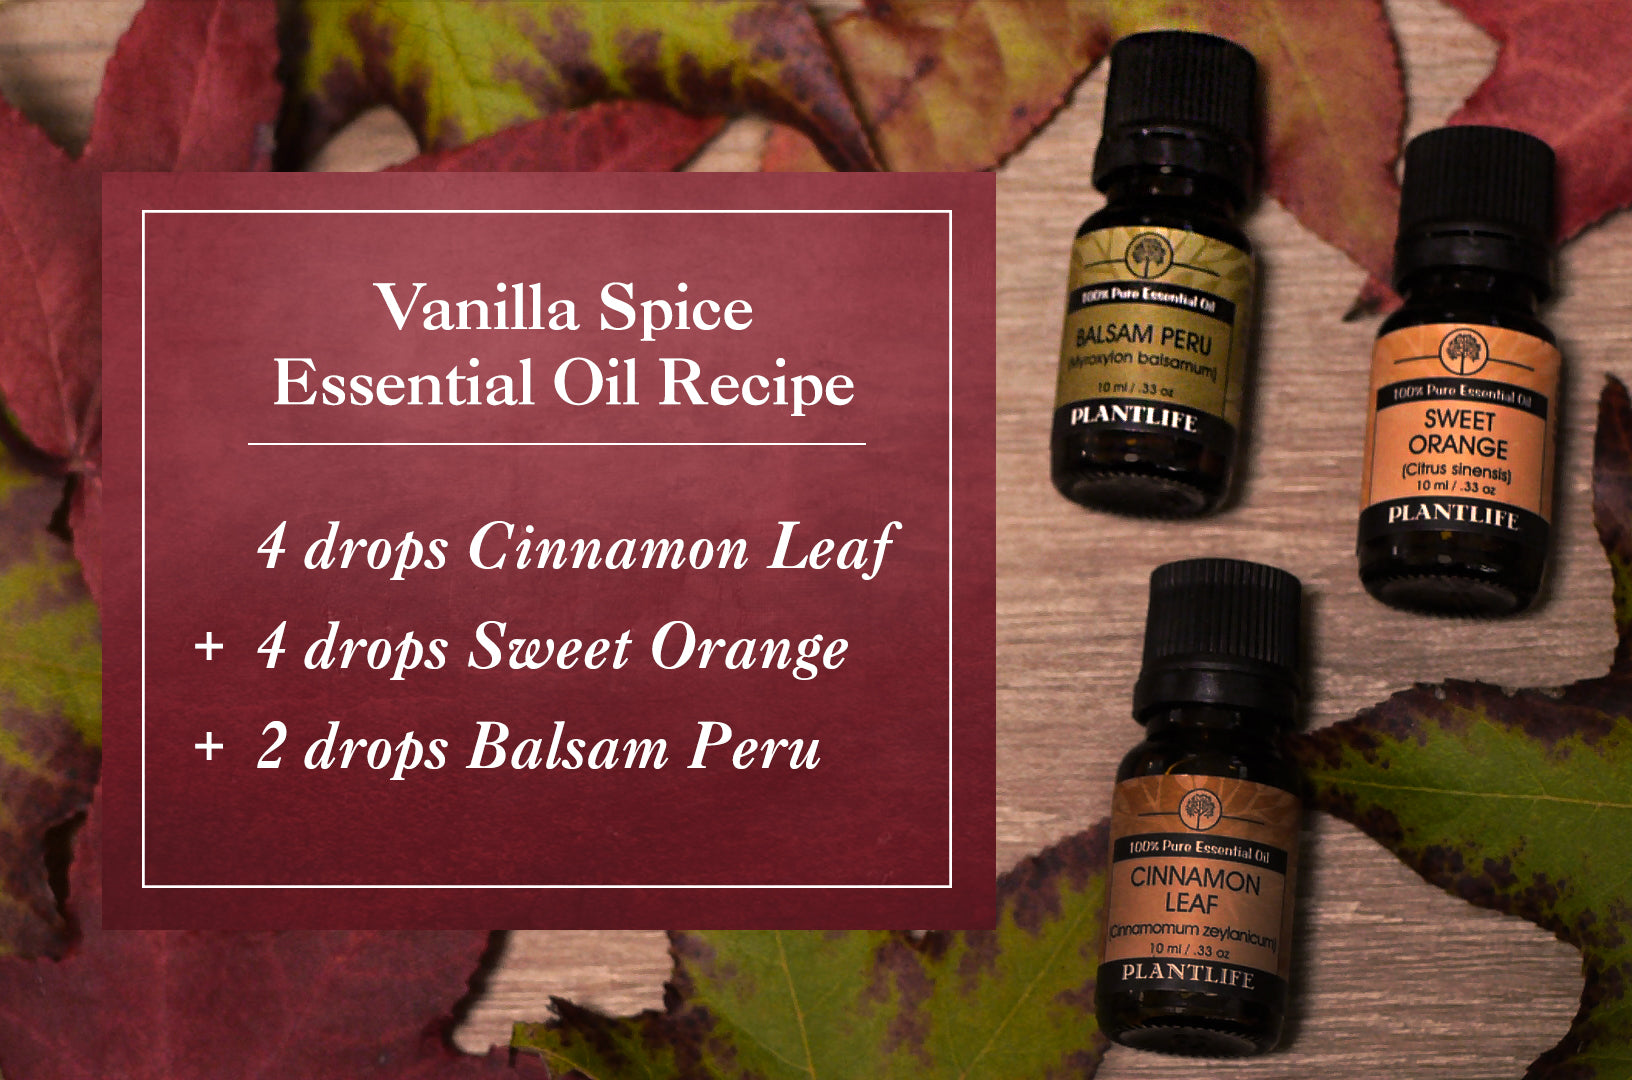 A Wonderful Warm Diffuser Blend for the Holidays